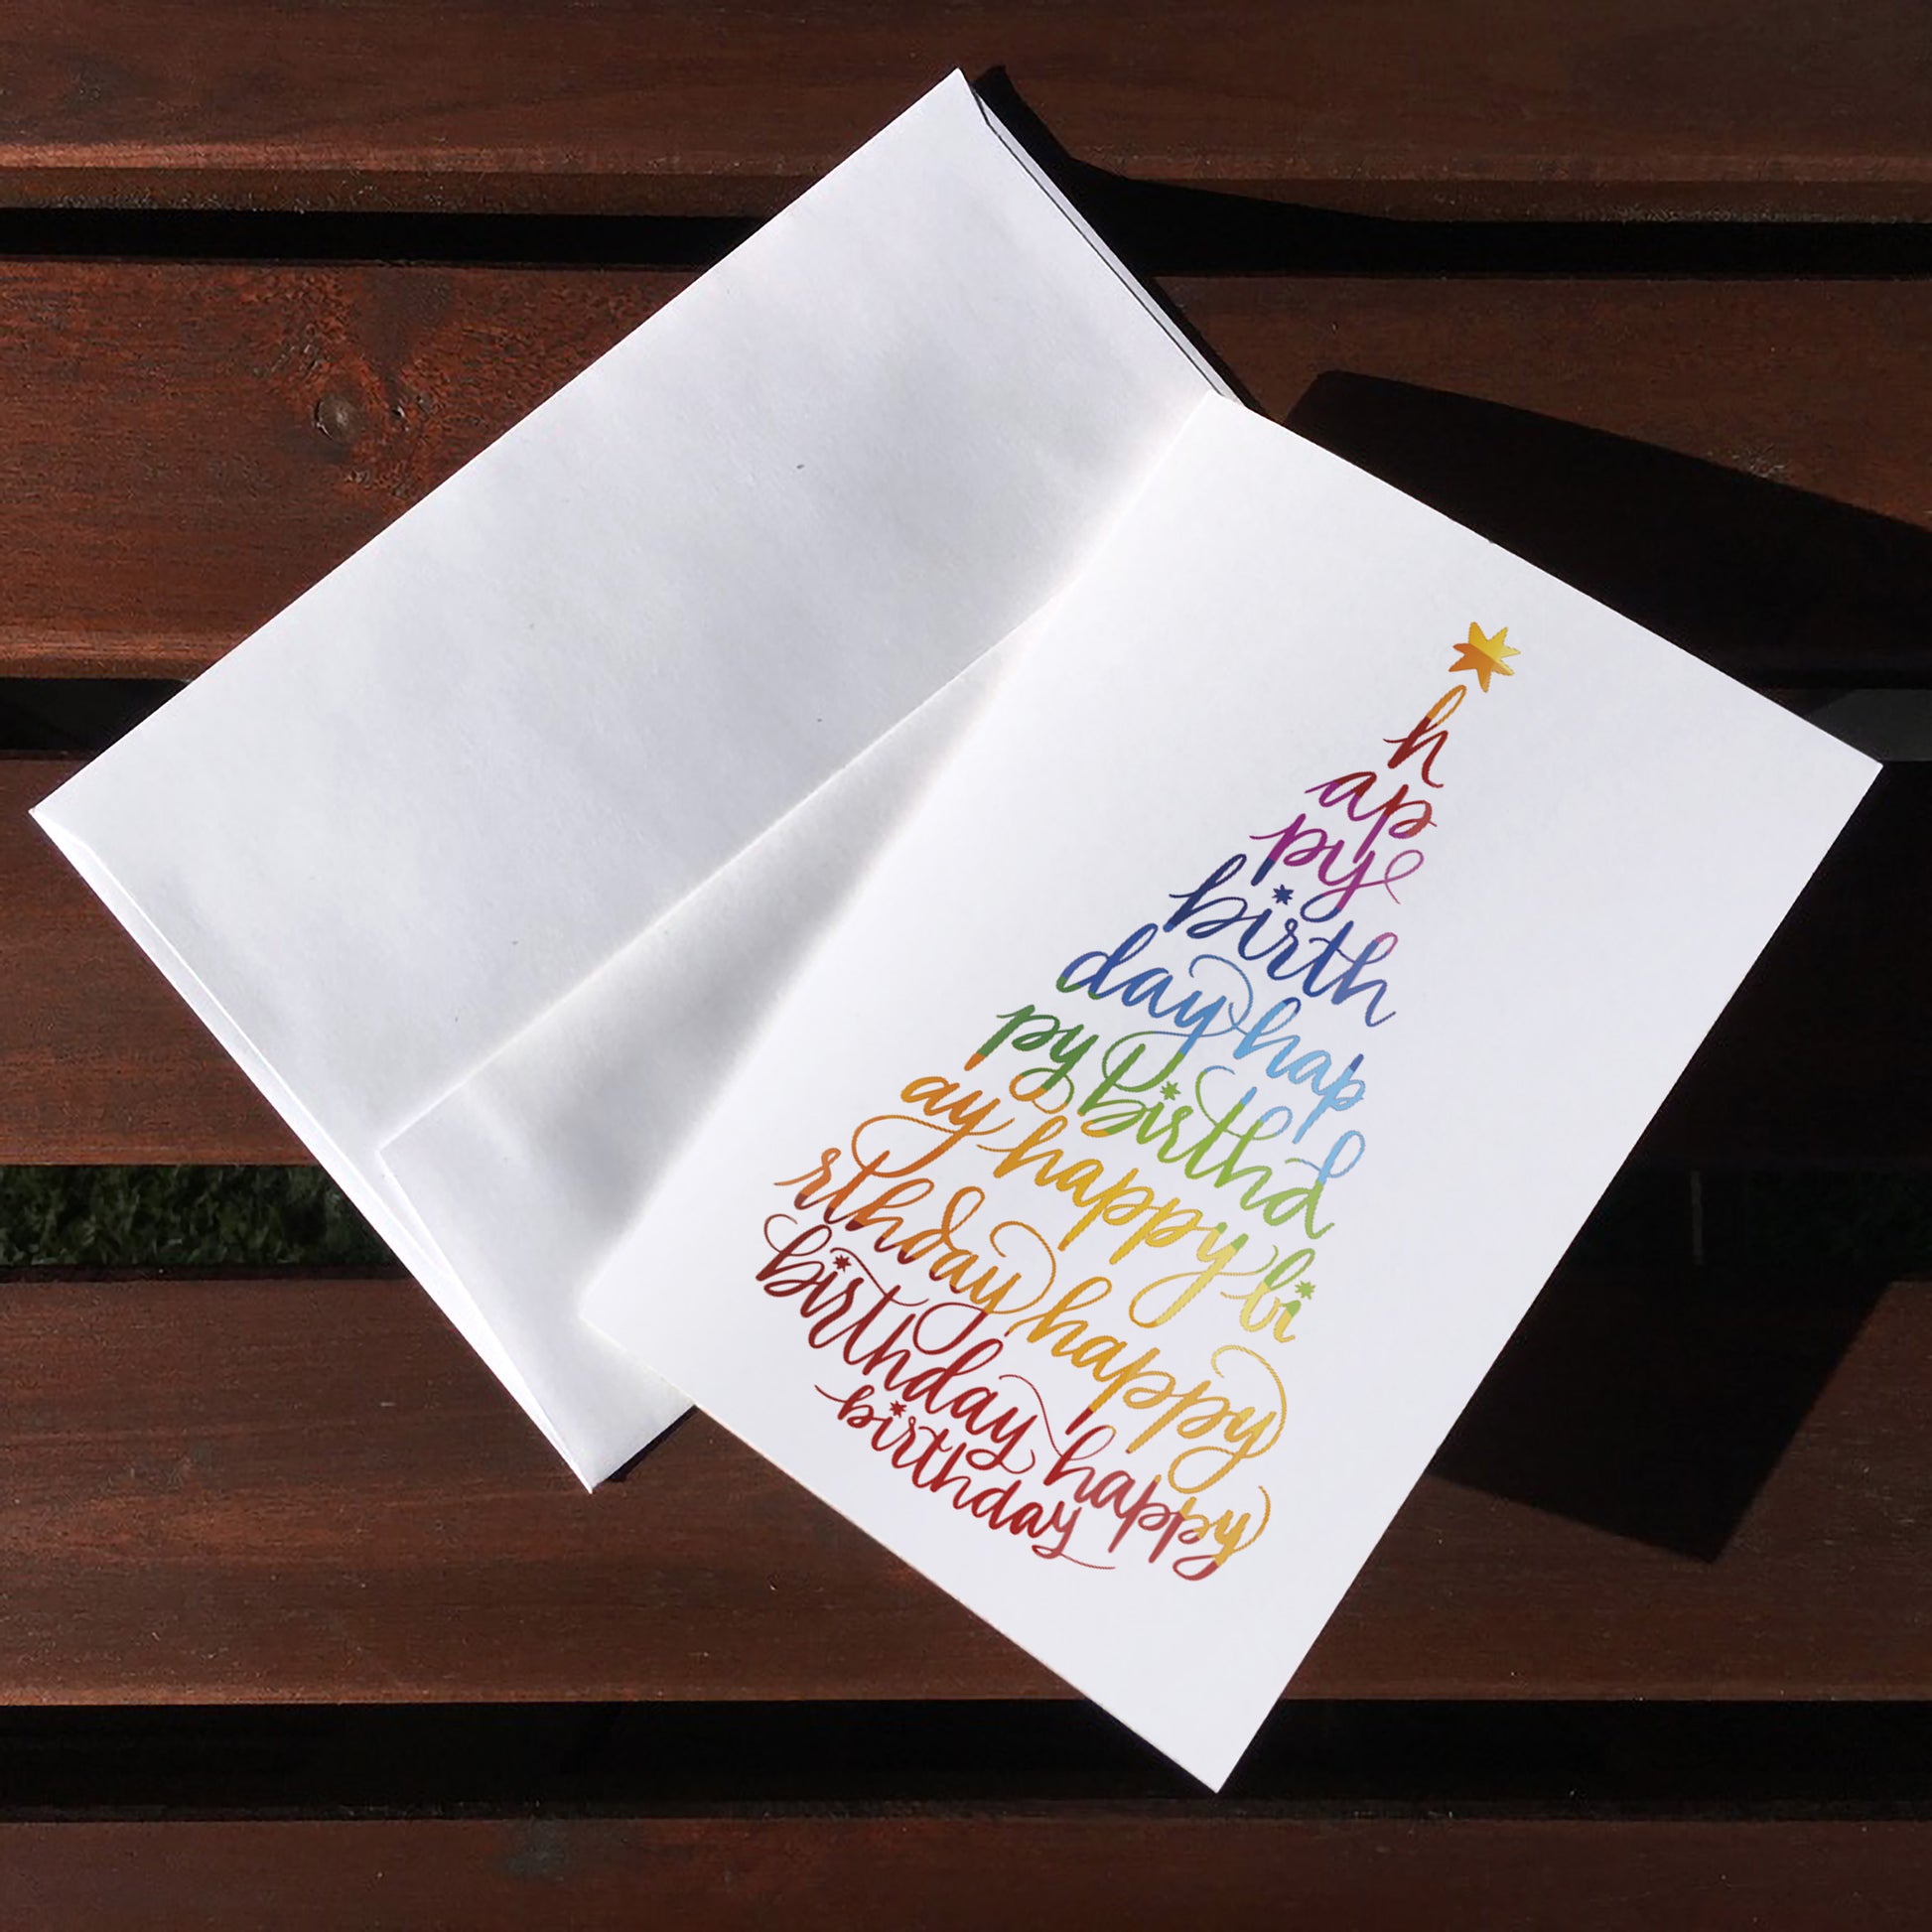 A top view of the greeting card: "Happy Birthday" written with calligraphy in the form of a party hat